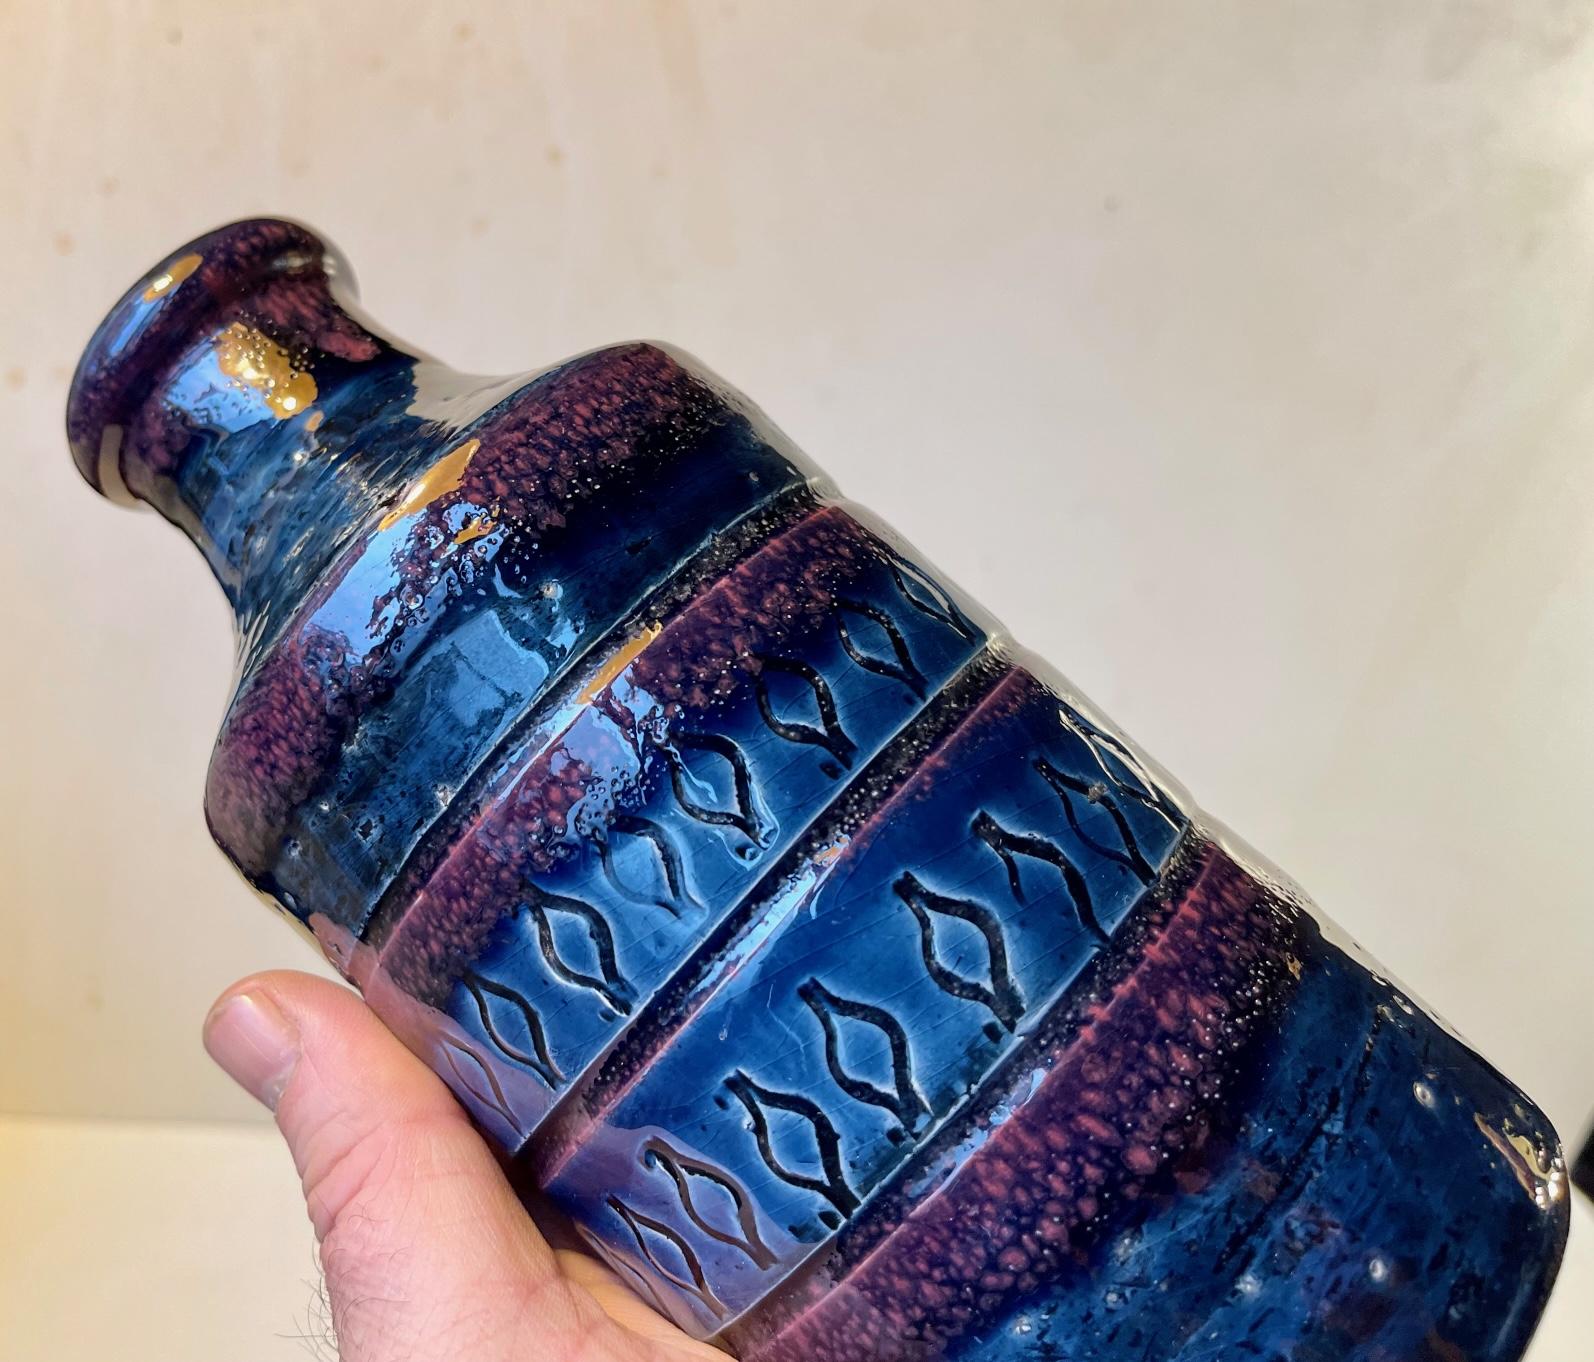 A rare vase in chamotte clay. Executed in high-gloss blue and purple glazes and featuring a center pattern of hand-incised water drops or onions. It was manufactured in Italy by Bitossi during the late 1960s. It is numbered and marked AROL to its